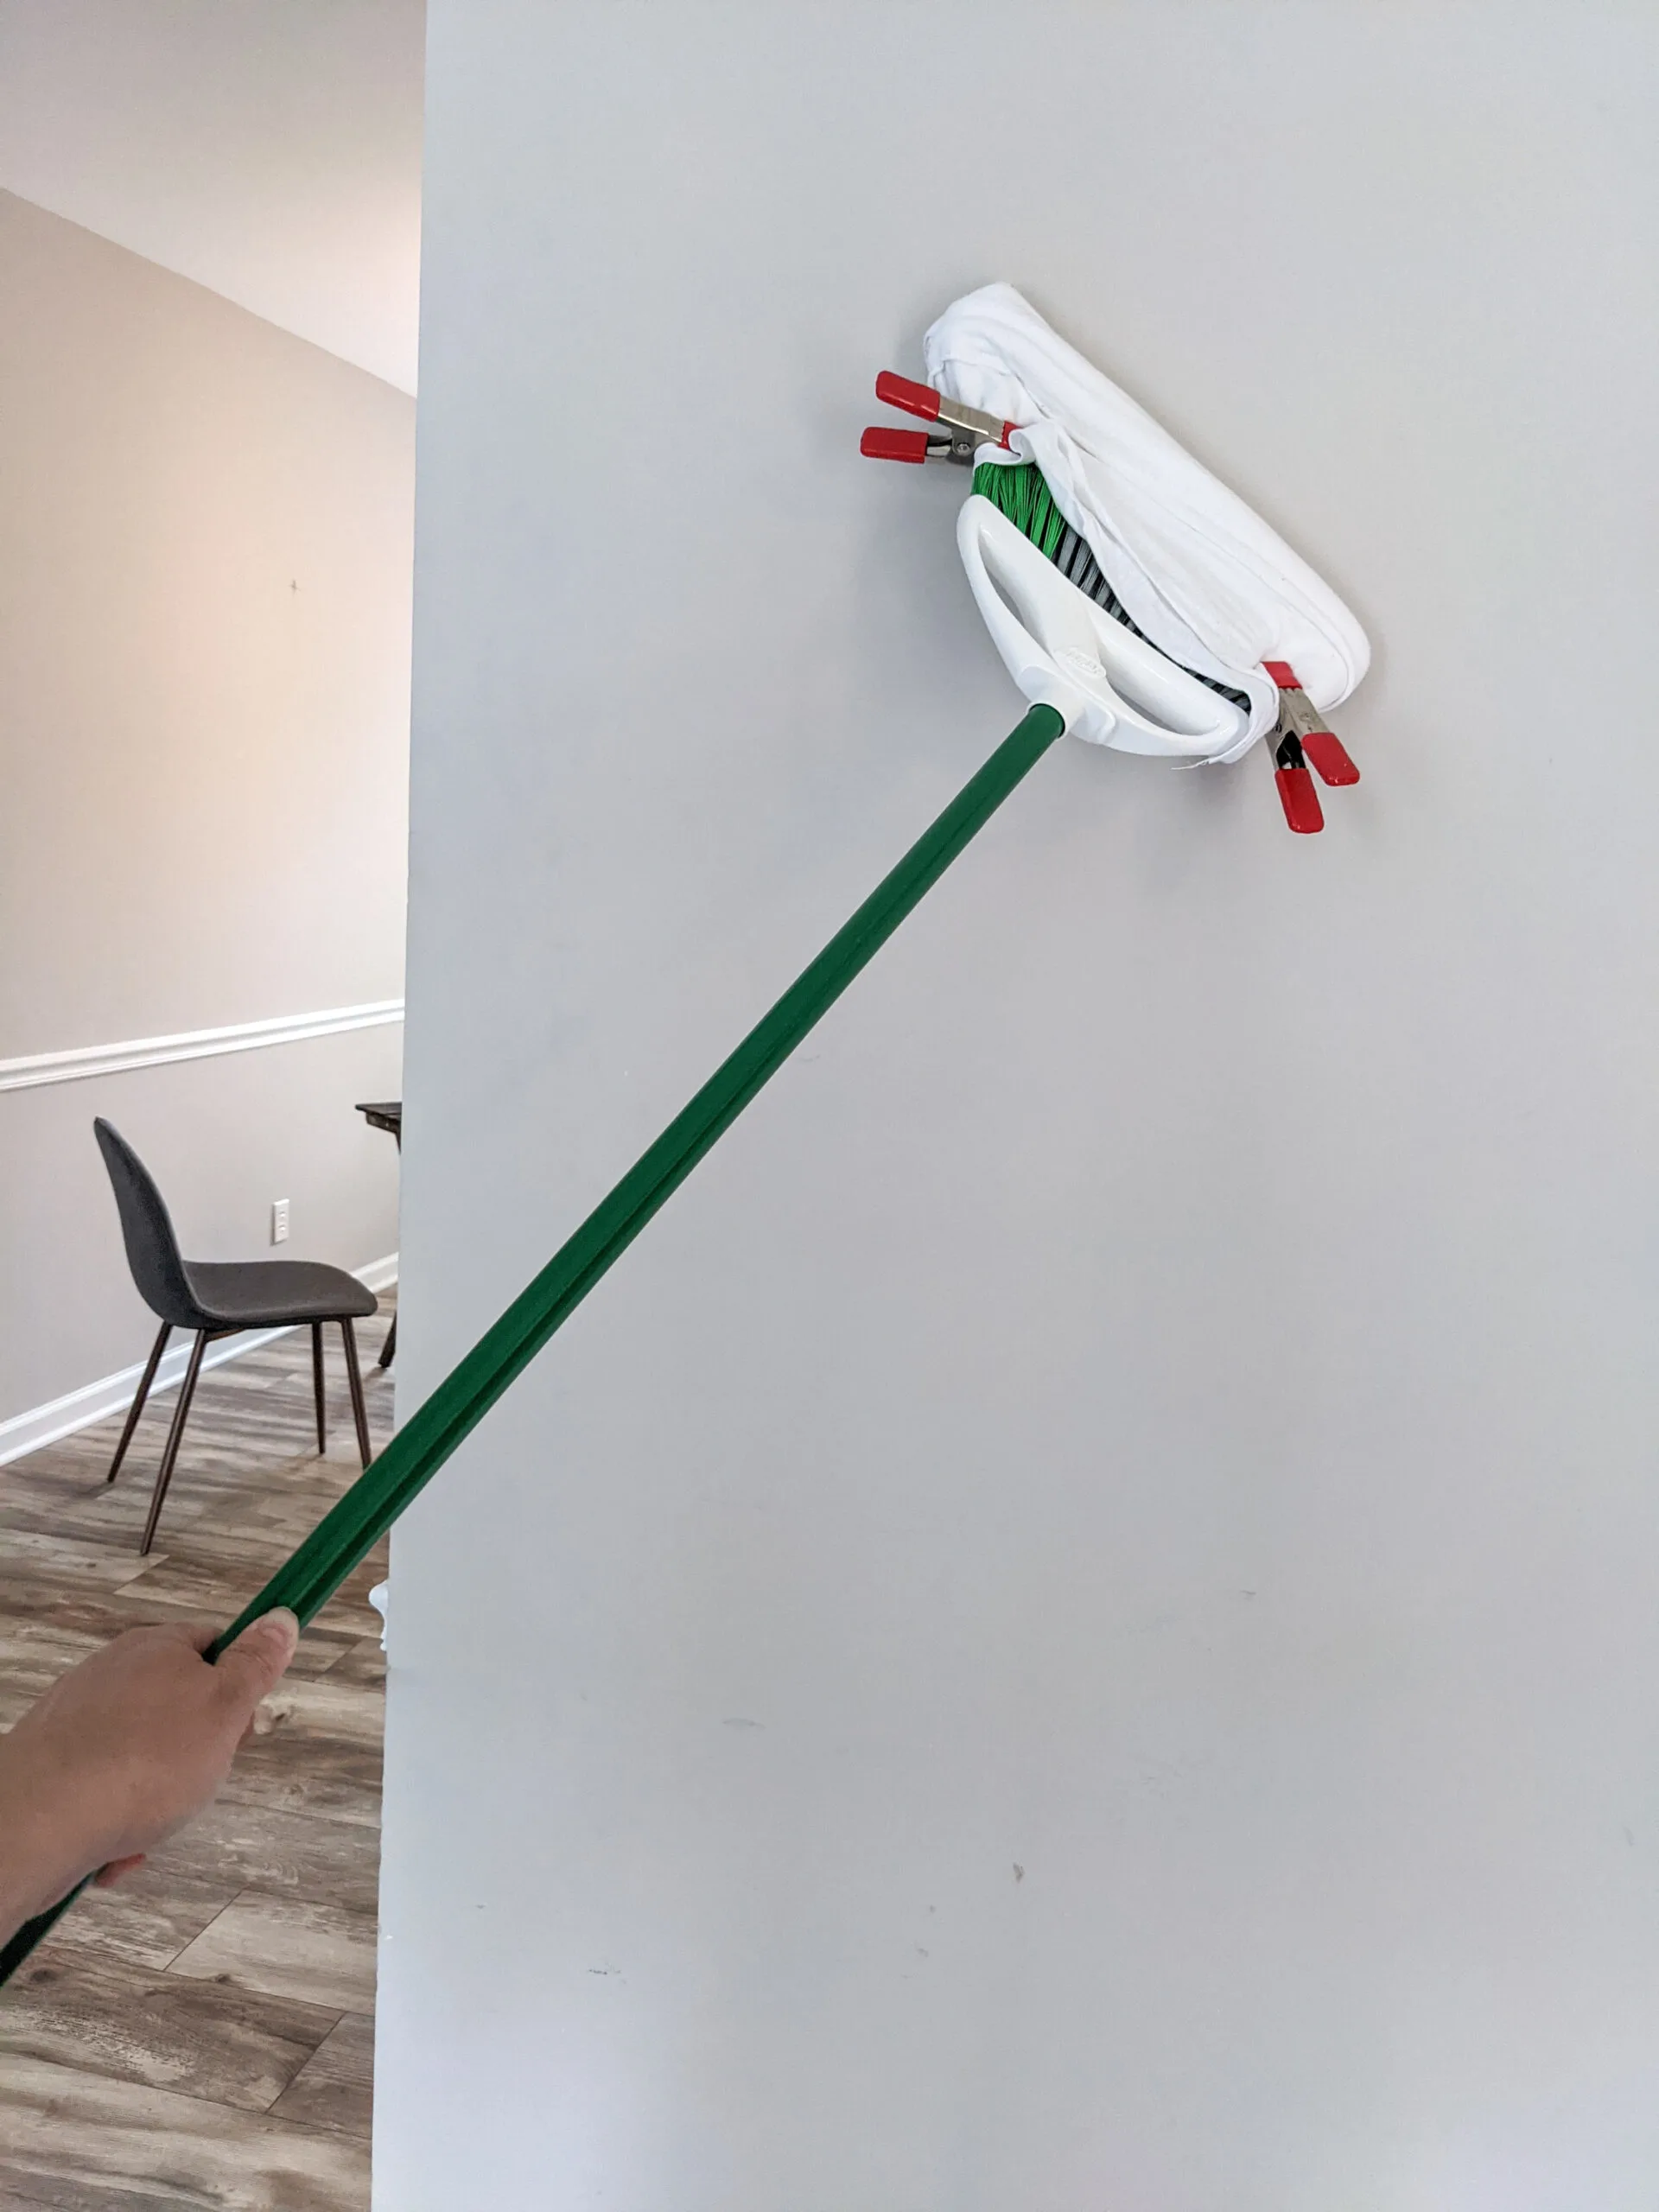 A wall being cleaned with a modified broom.